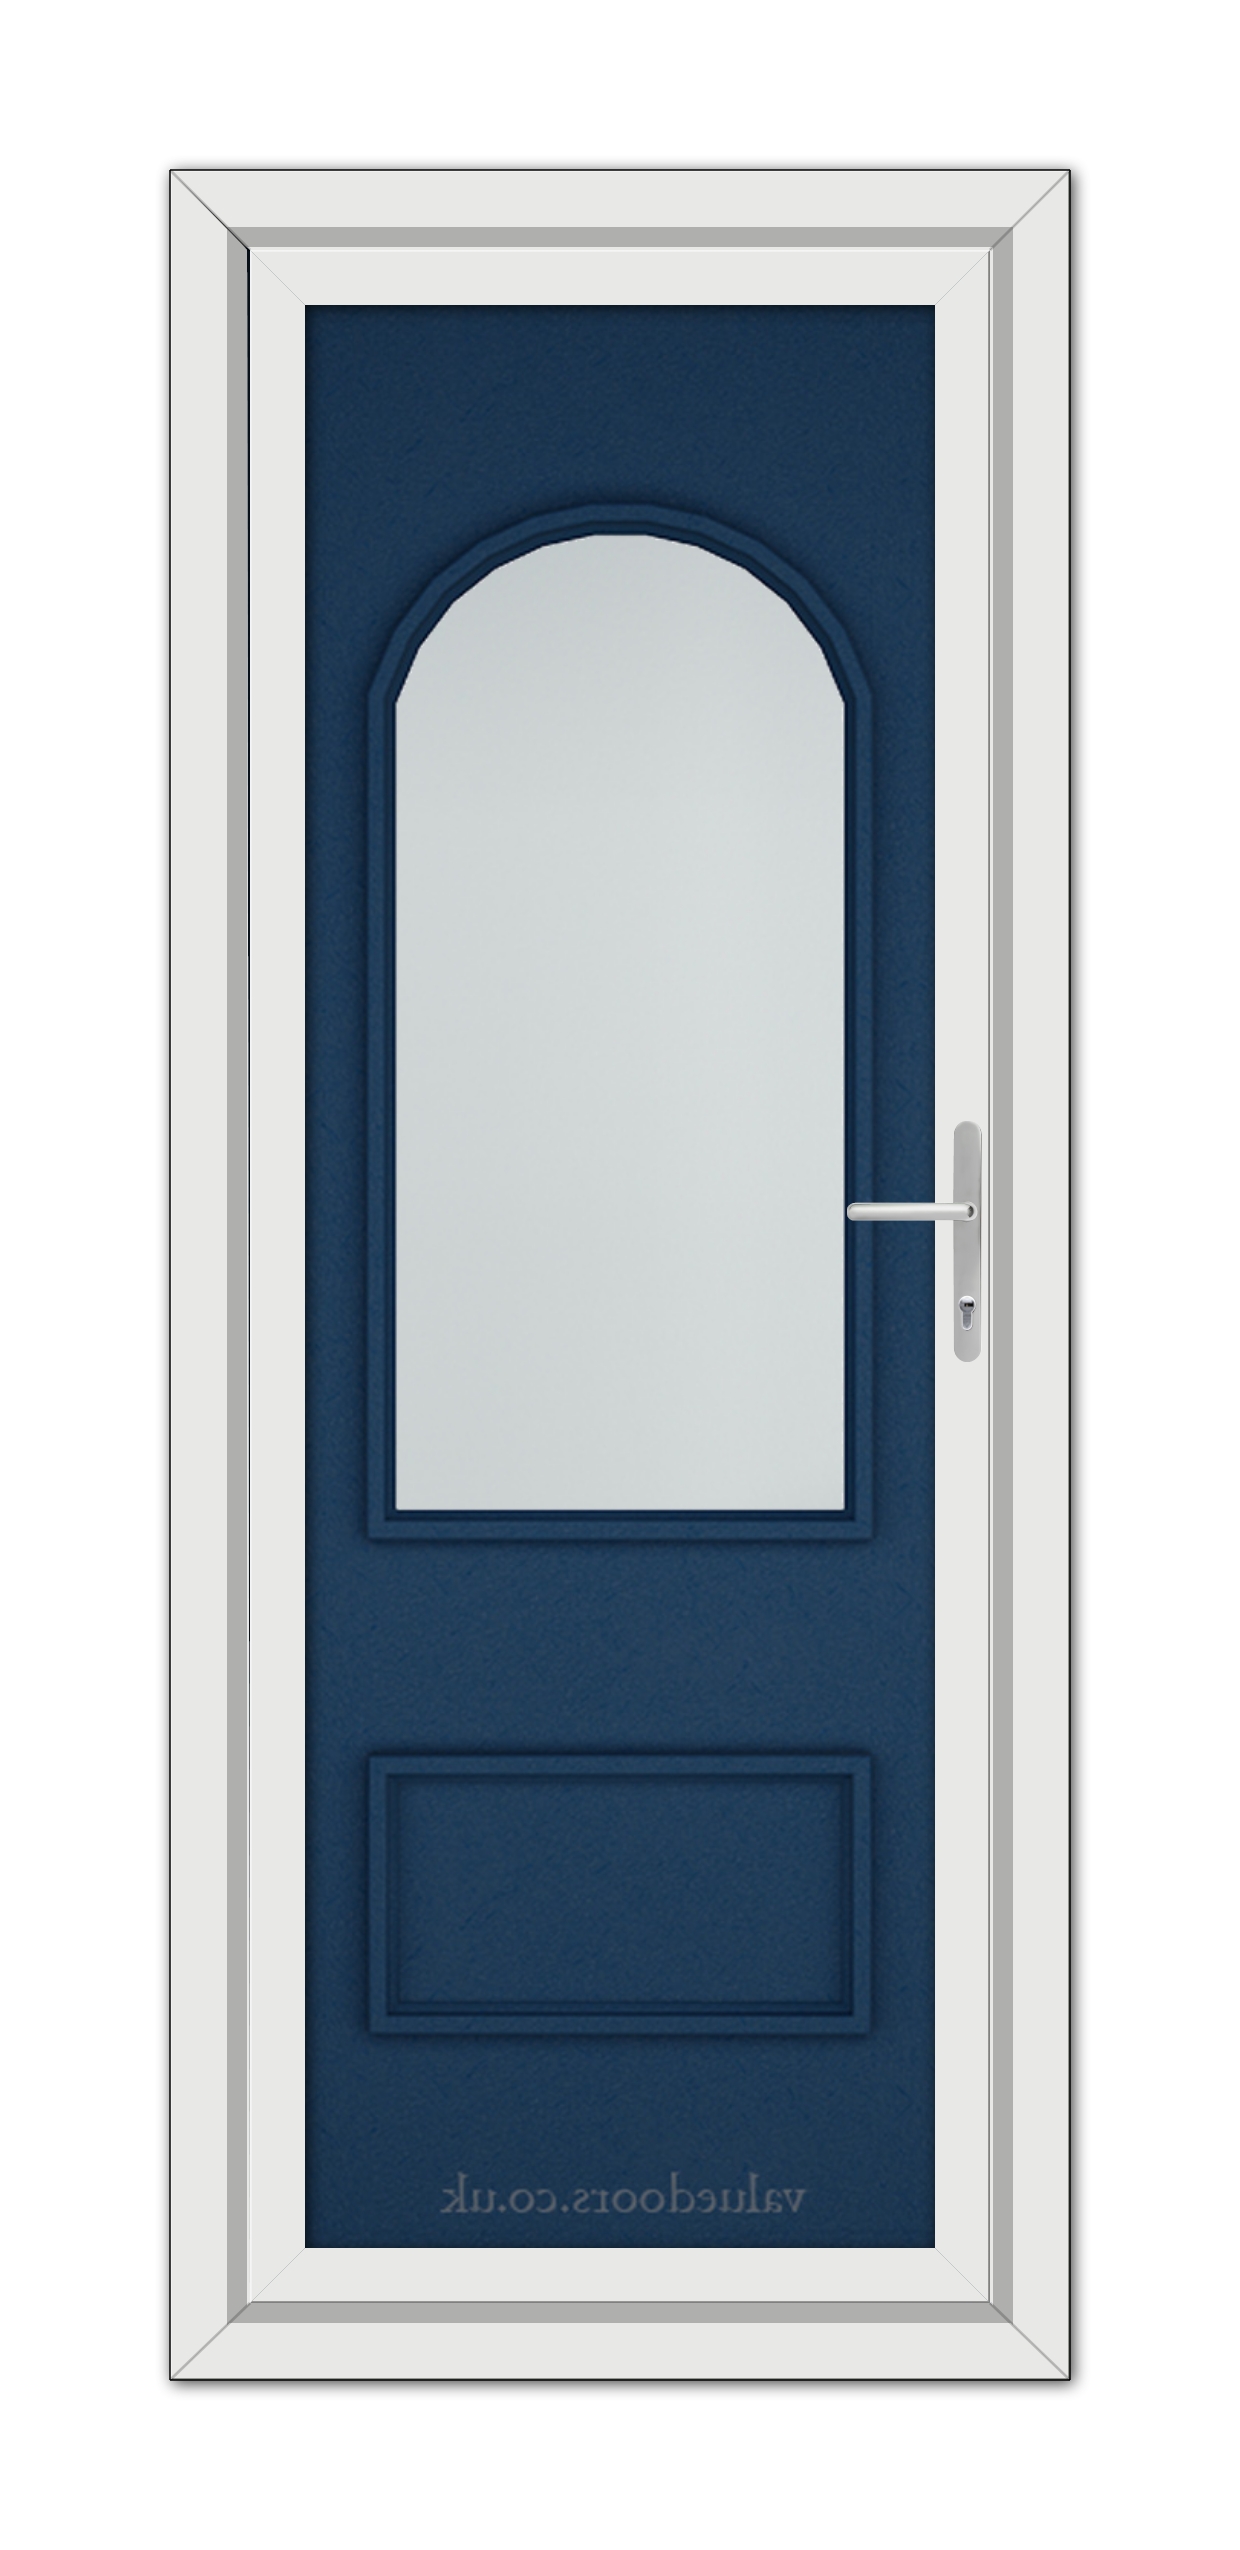 A vertical image of a Blue Rockingham uPVC Door with a white frame, featuring a tall, arched window and a metal handle on the right side.